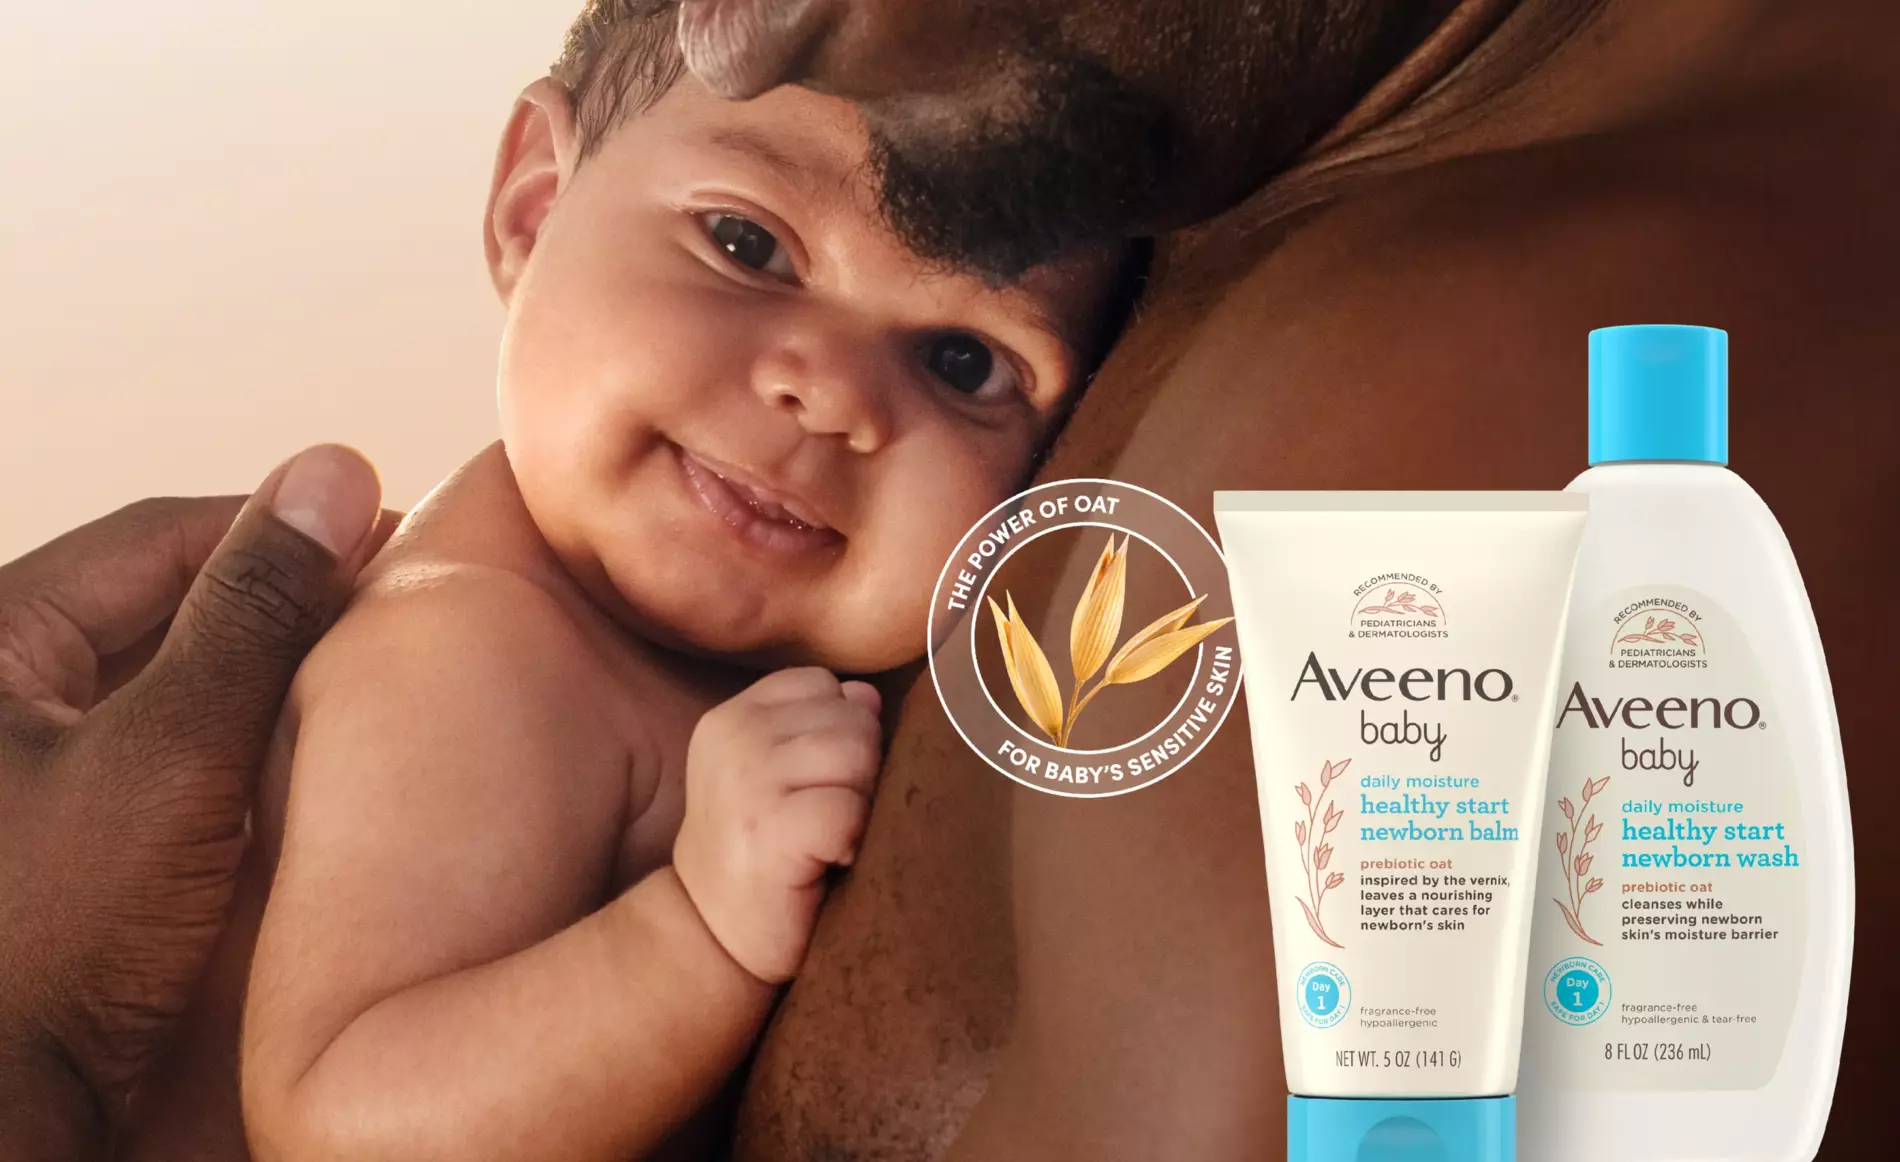 Aveeno_All_Baby_Products_Father_Holding _Baby_Banner